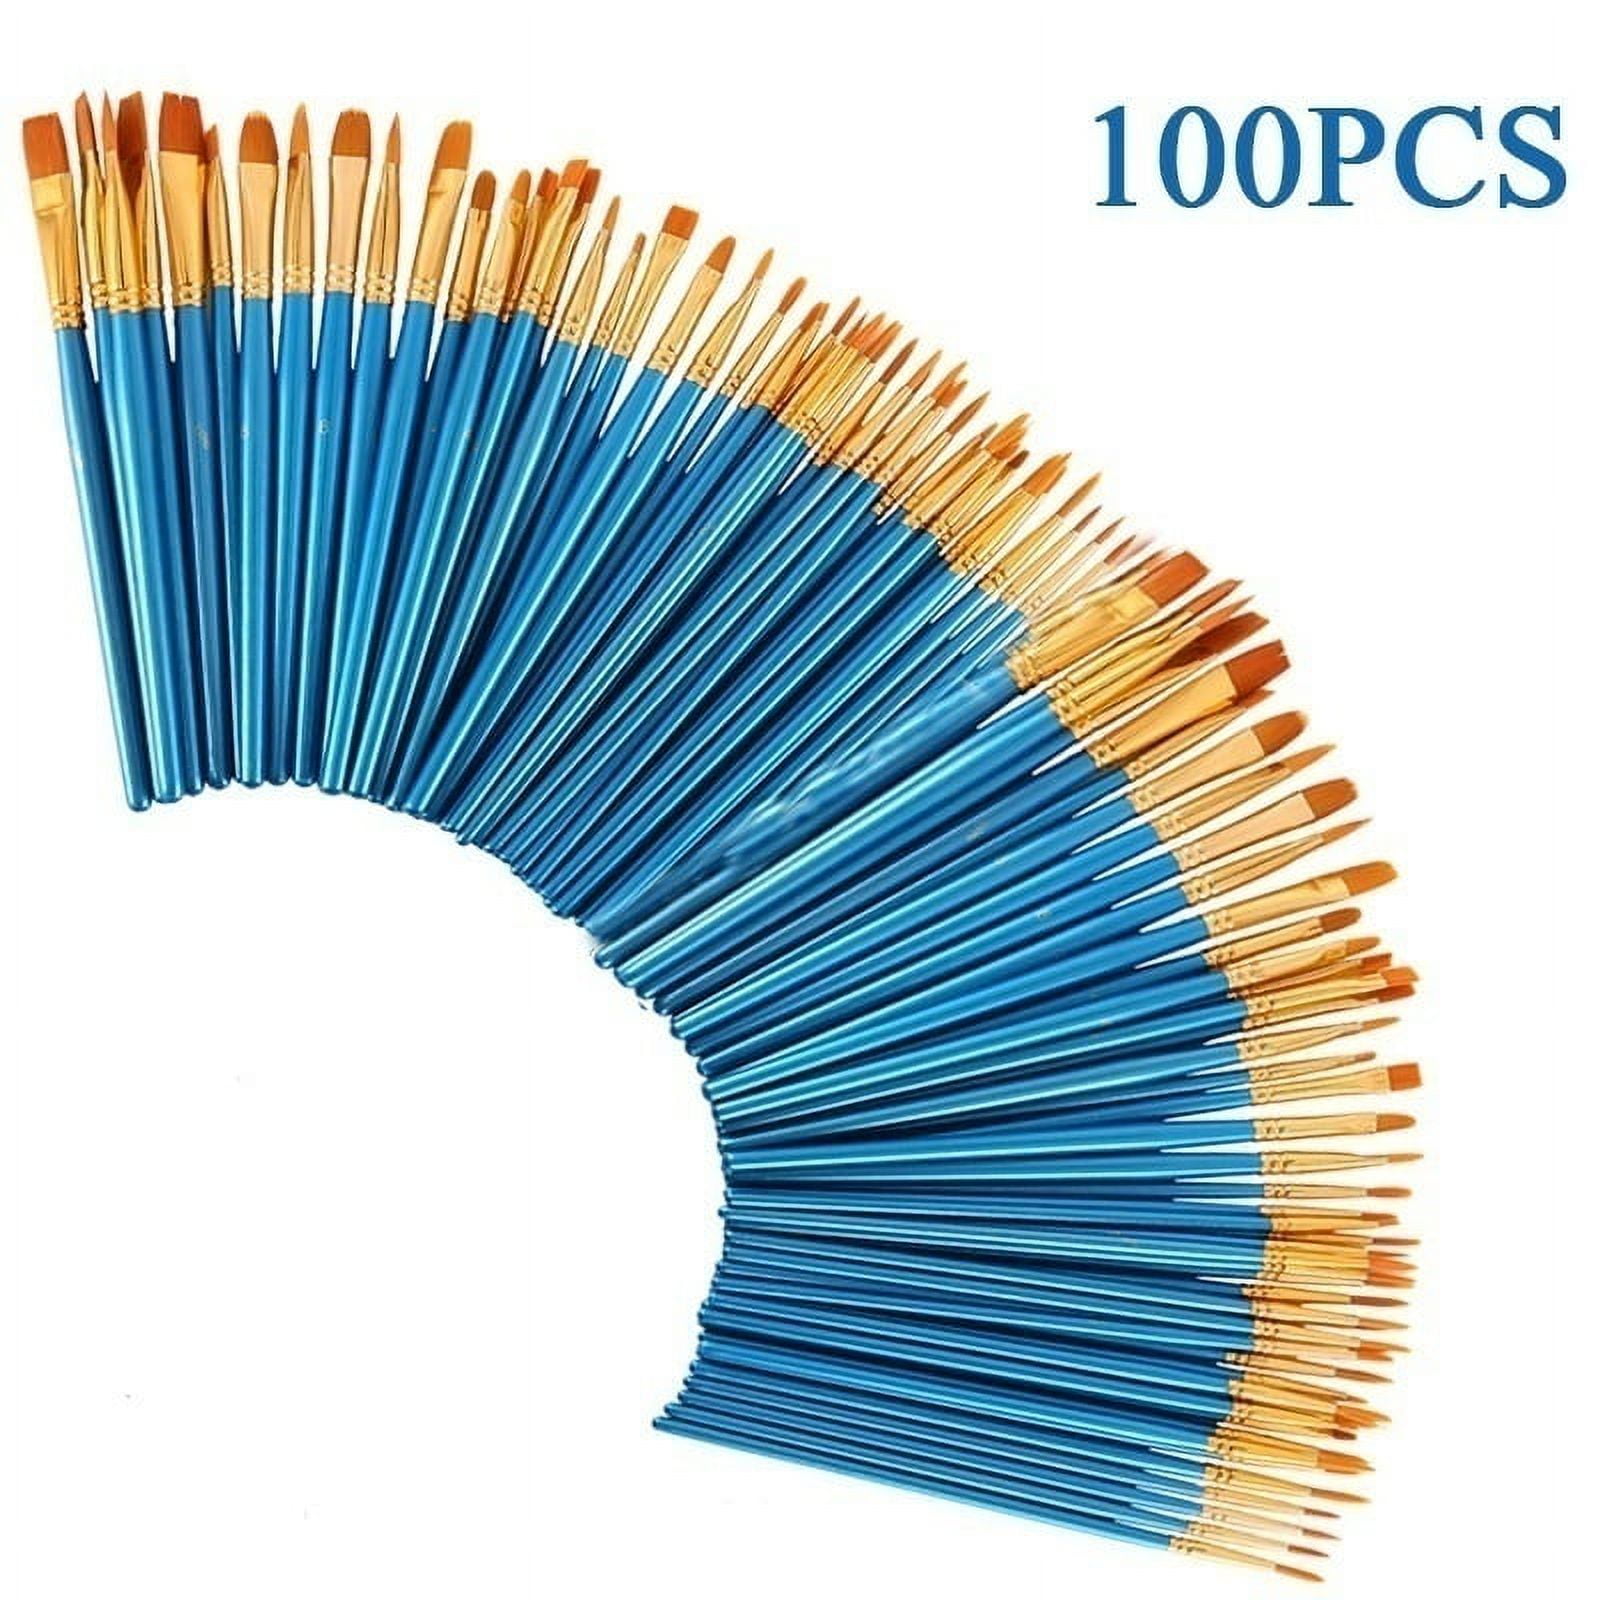 10pcs Nylon Wool Paint Brushes Wood Handle Oil Painting Brush Gouache Acrylic Oil Painting Brush for Students Artists Use (Rubylith), Size: 18.8X1.3cm